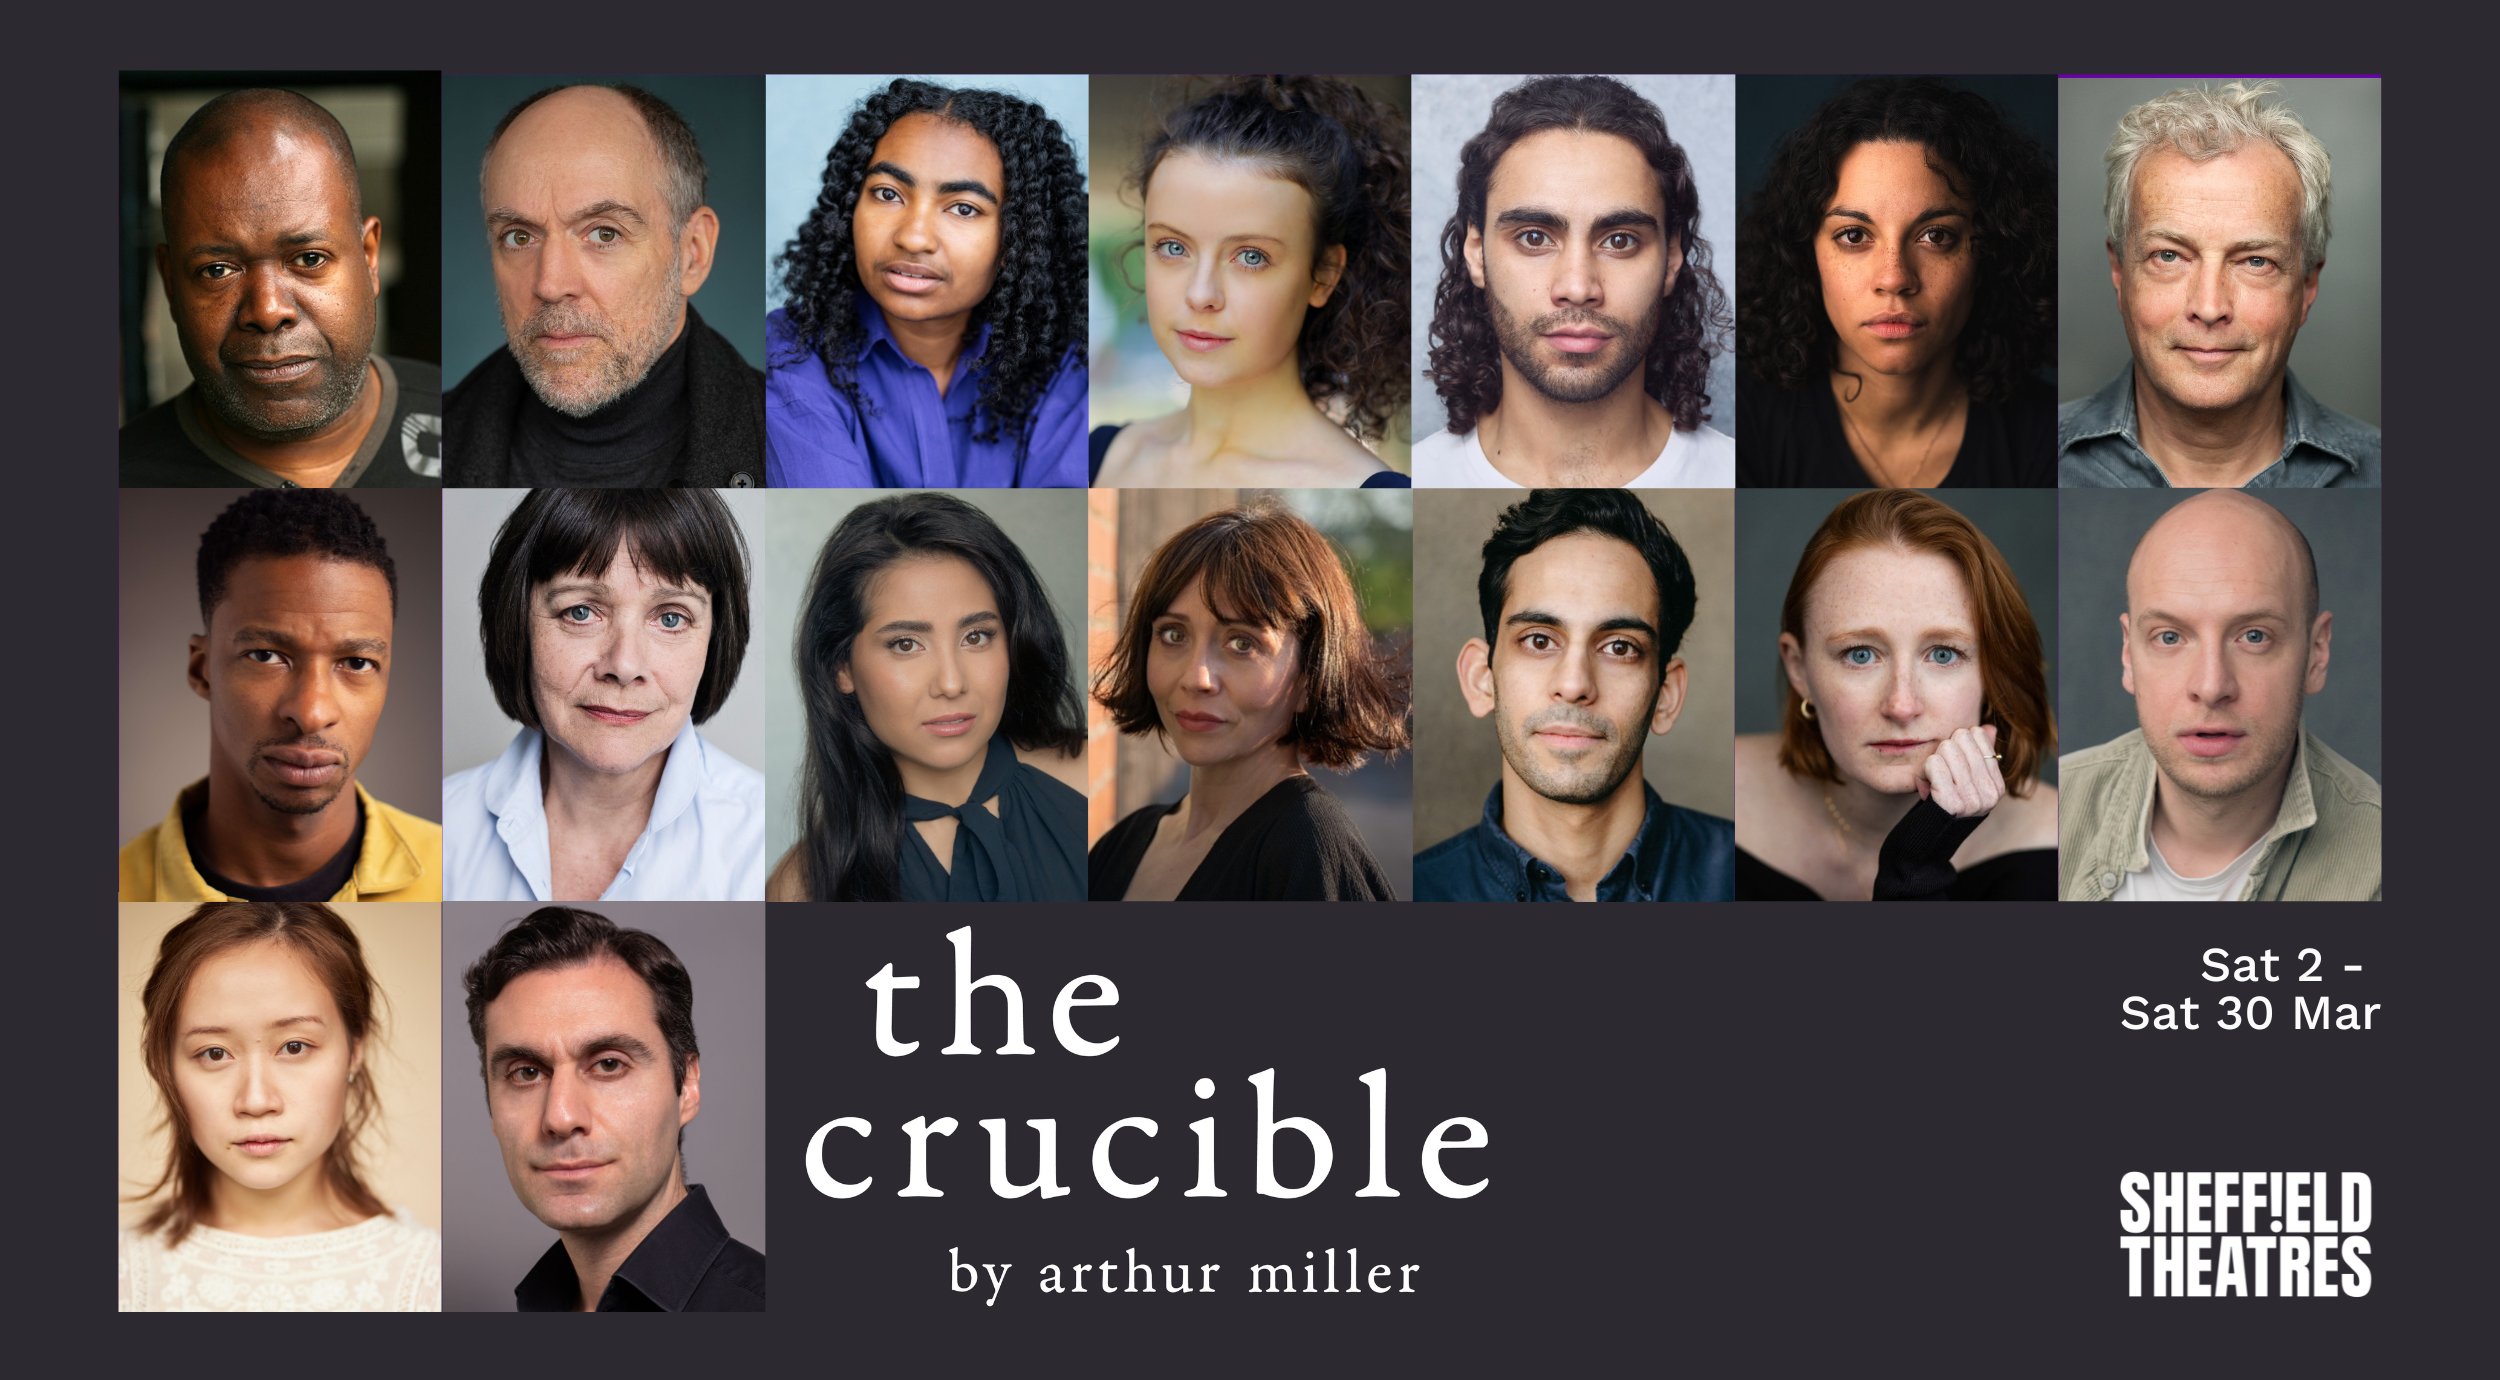 A Conversation With the Cast of 'The Crucible